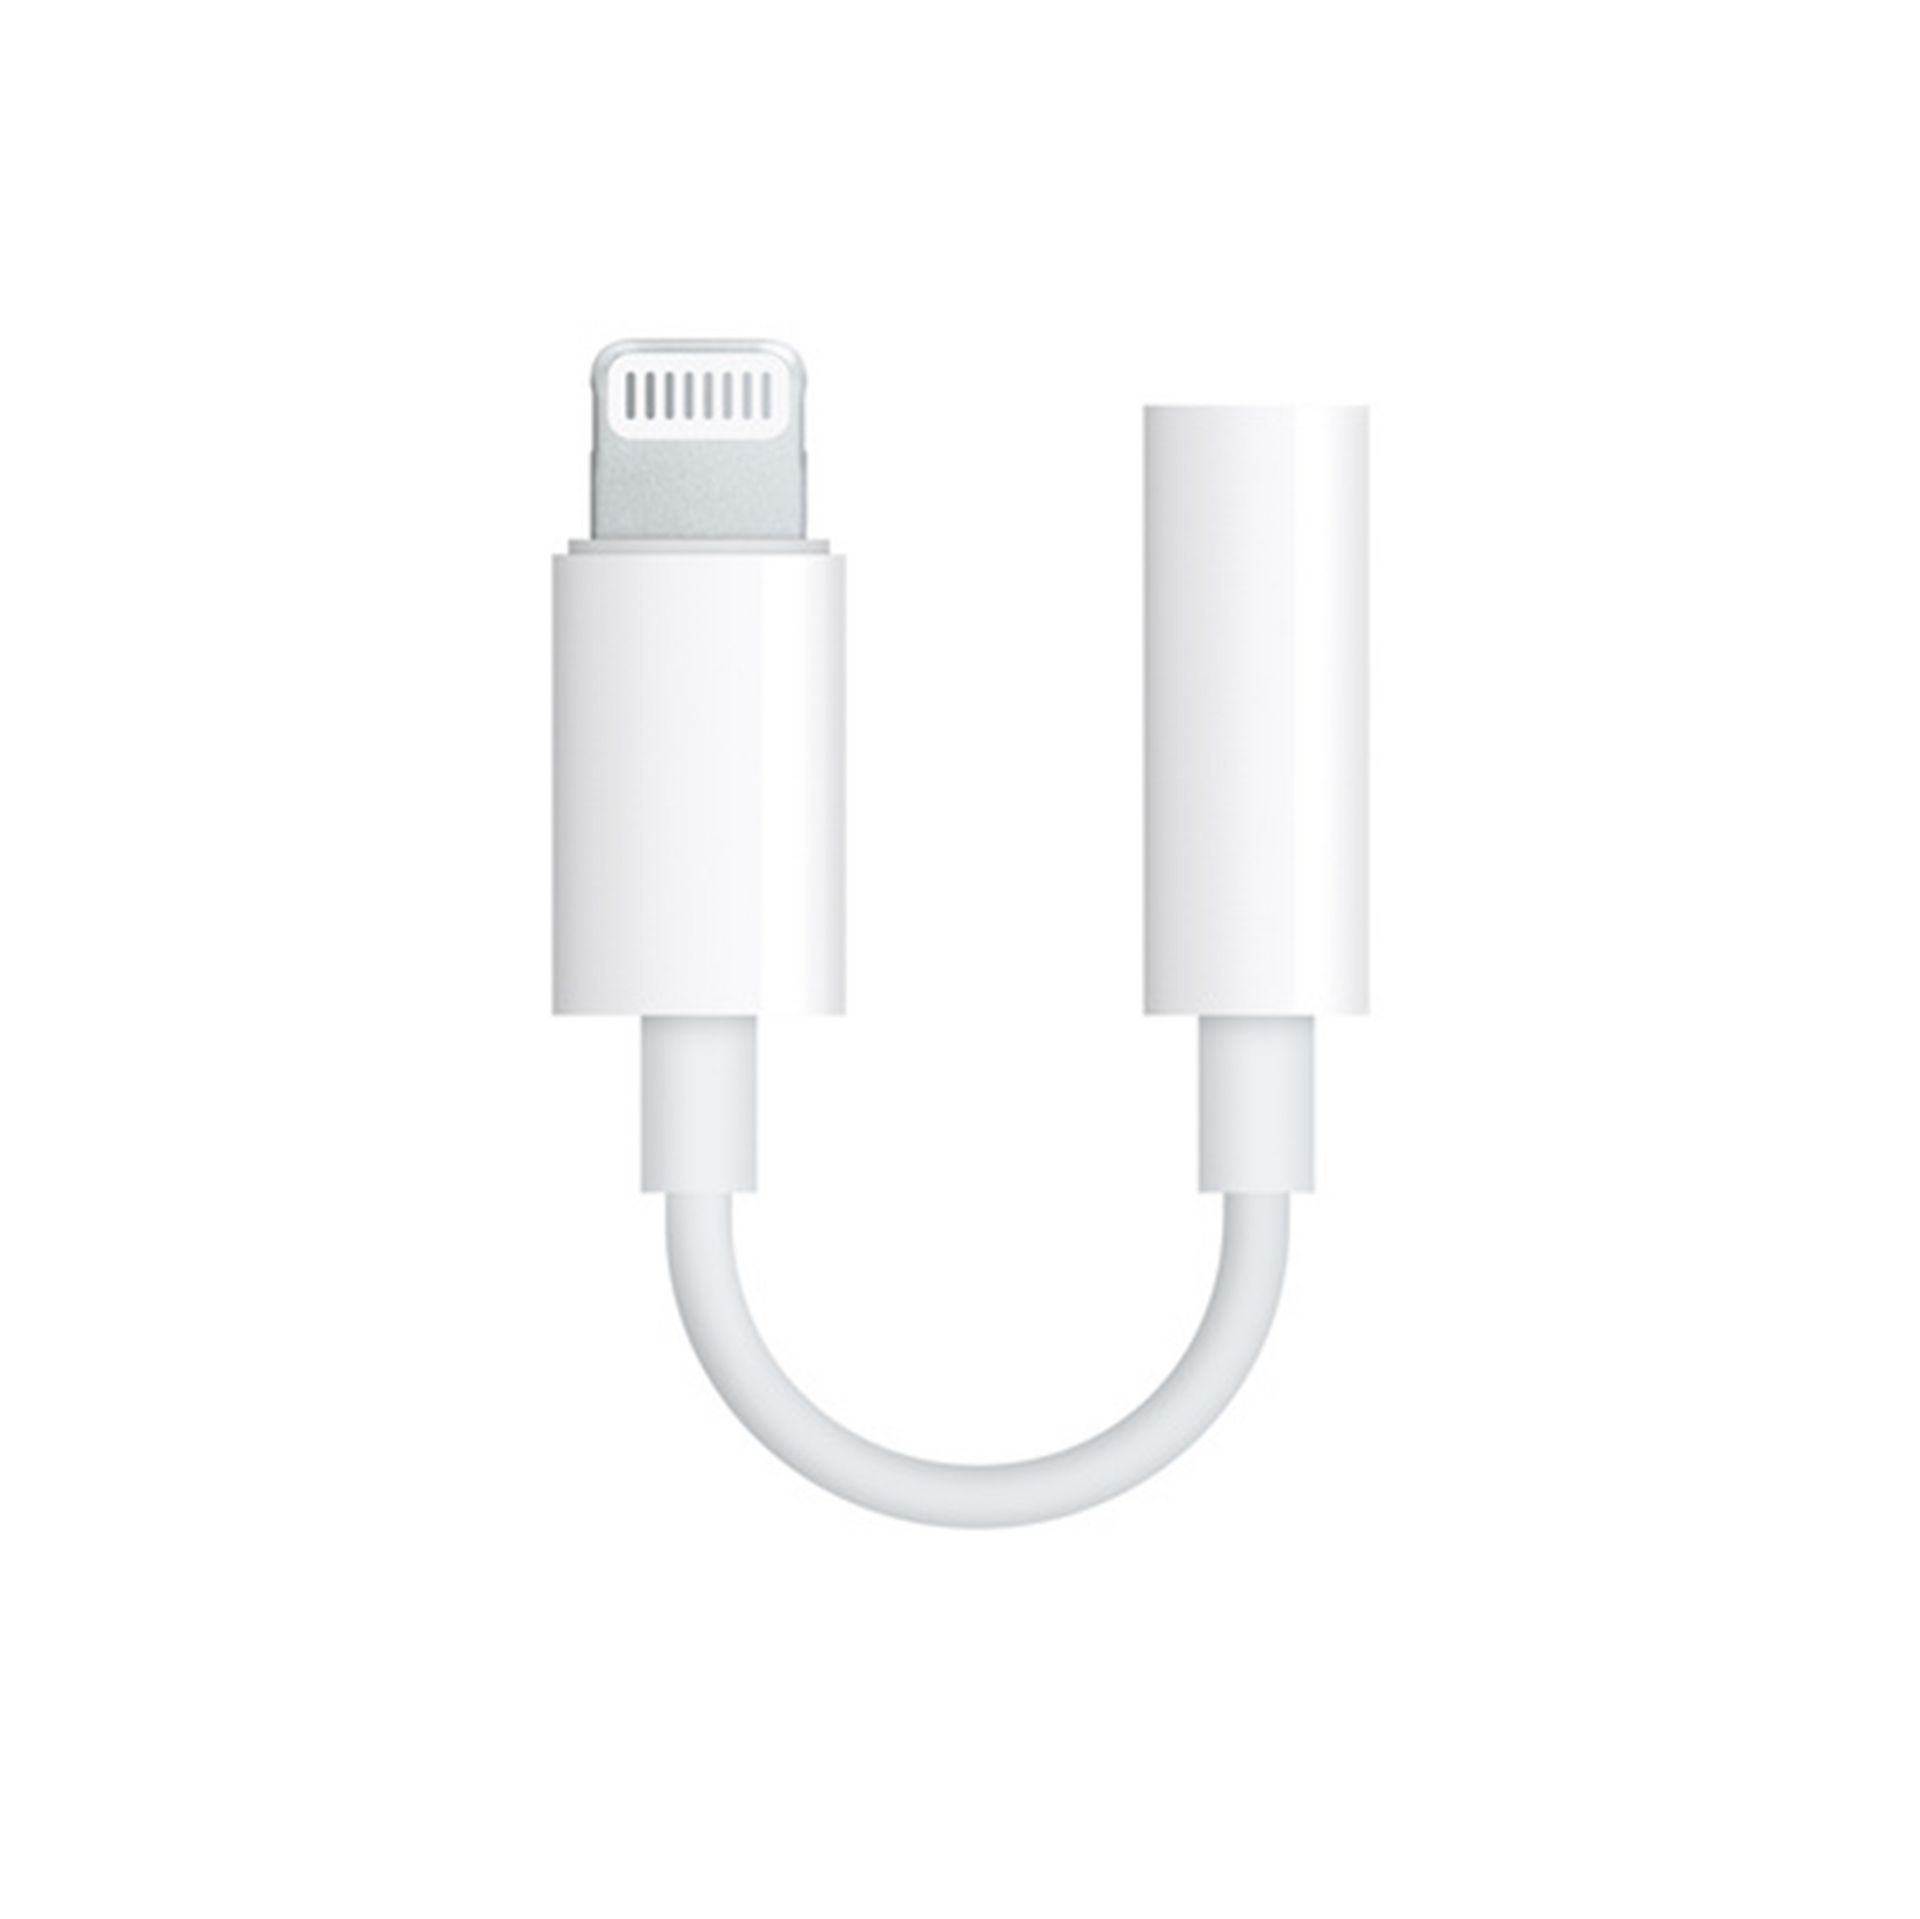 Lightning to 3.5mm Headphone Jack Adapter for Apple iPhone